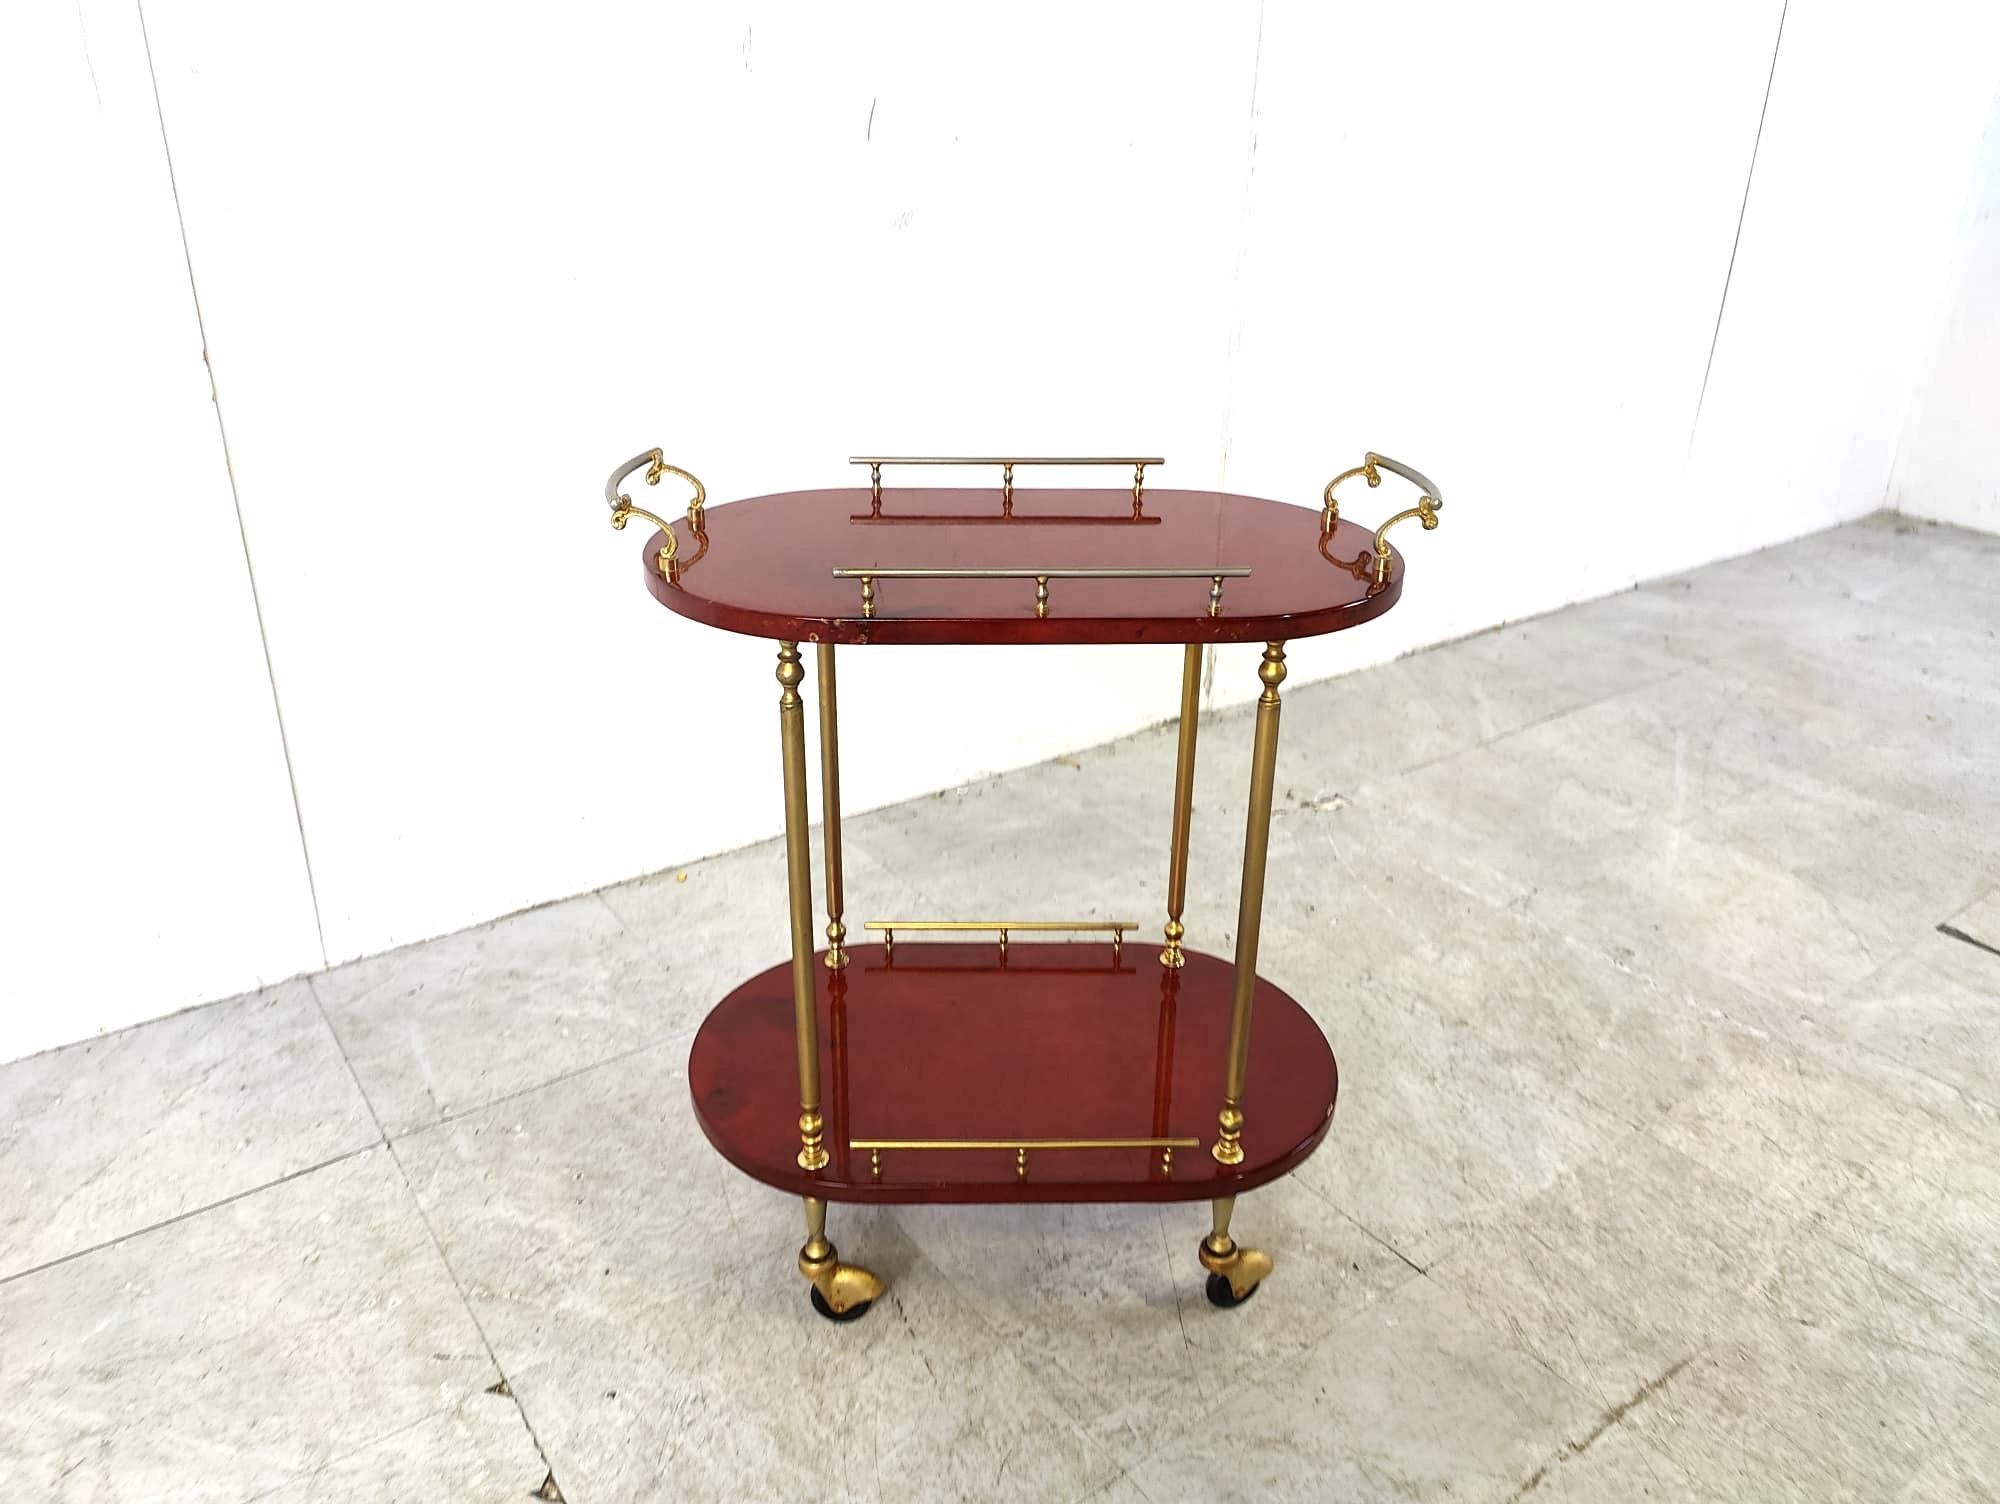 Very rare Aldo Tura Goatskin or parchment bar cart. This bar cart was made in Italy in the 1960s. 

Constructed of lacquered goatskin / parchment and gilt metal hardware.

Good condition.

1960s - Italy

Dimensions:
Height: 60cm
Width: 54cm
Depth: